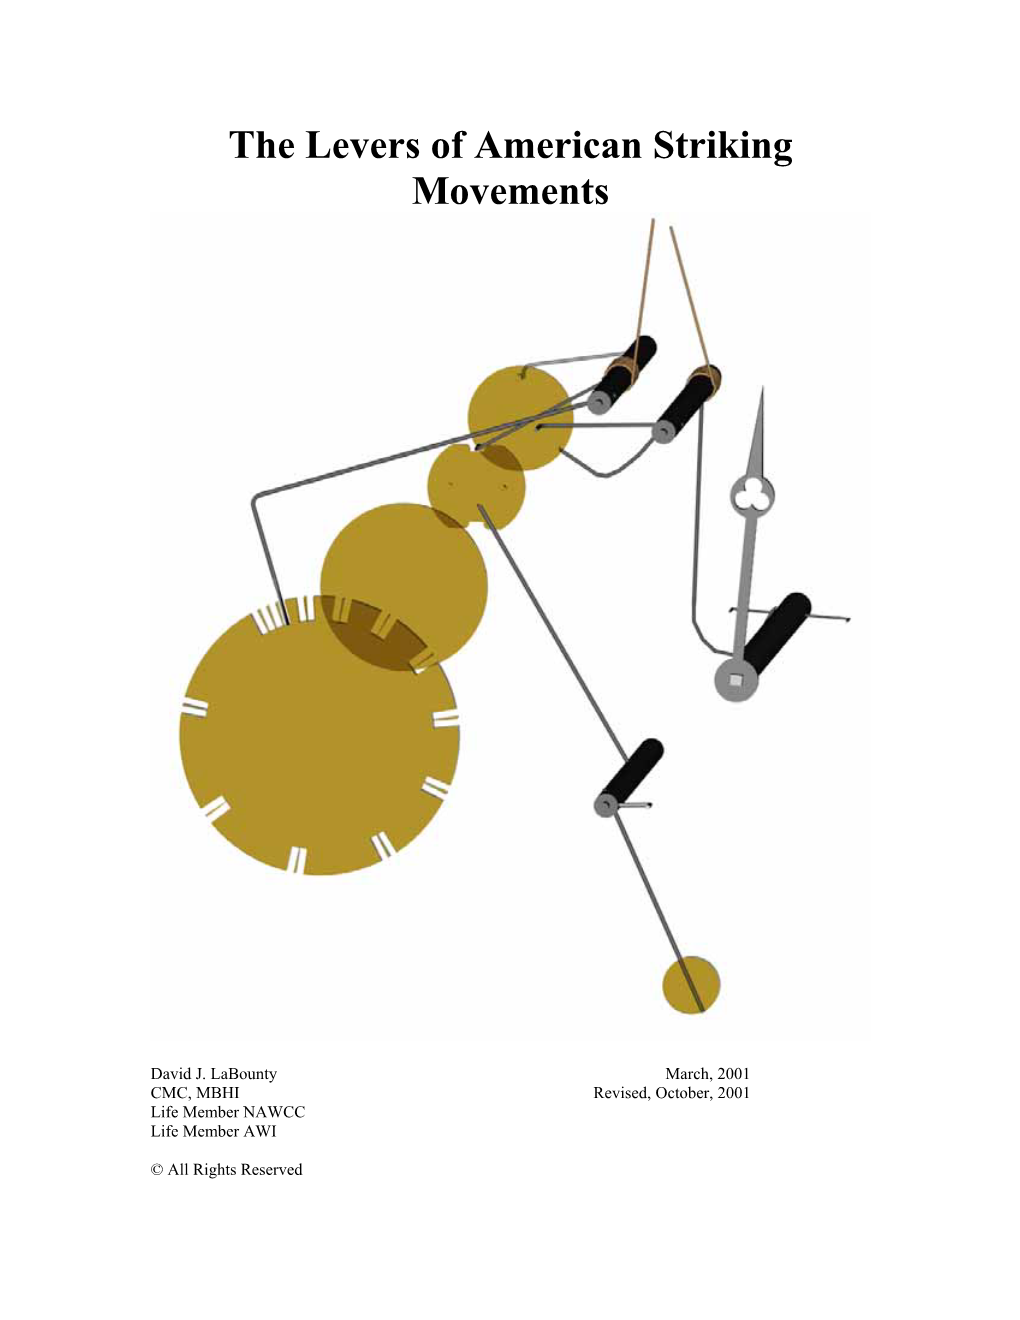 The Levers of American Striking Movements